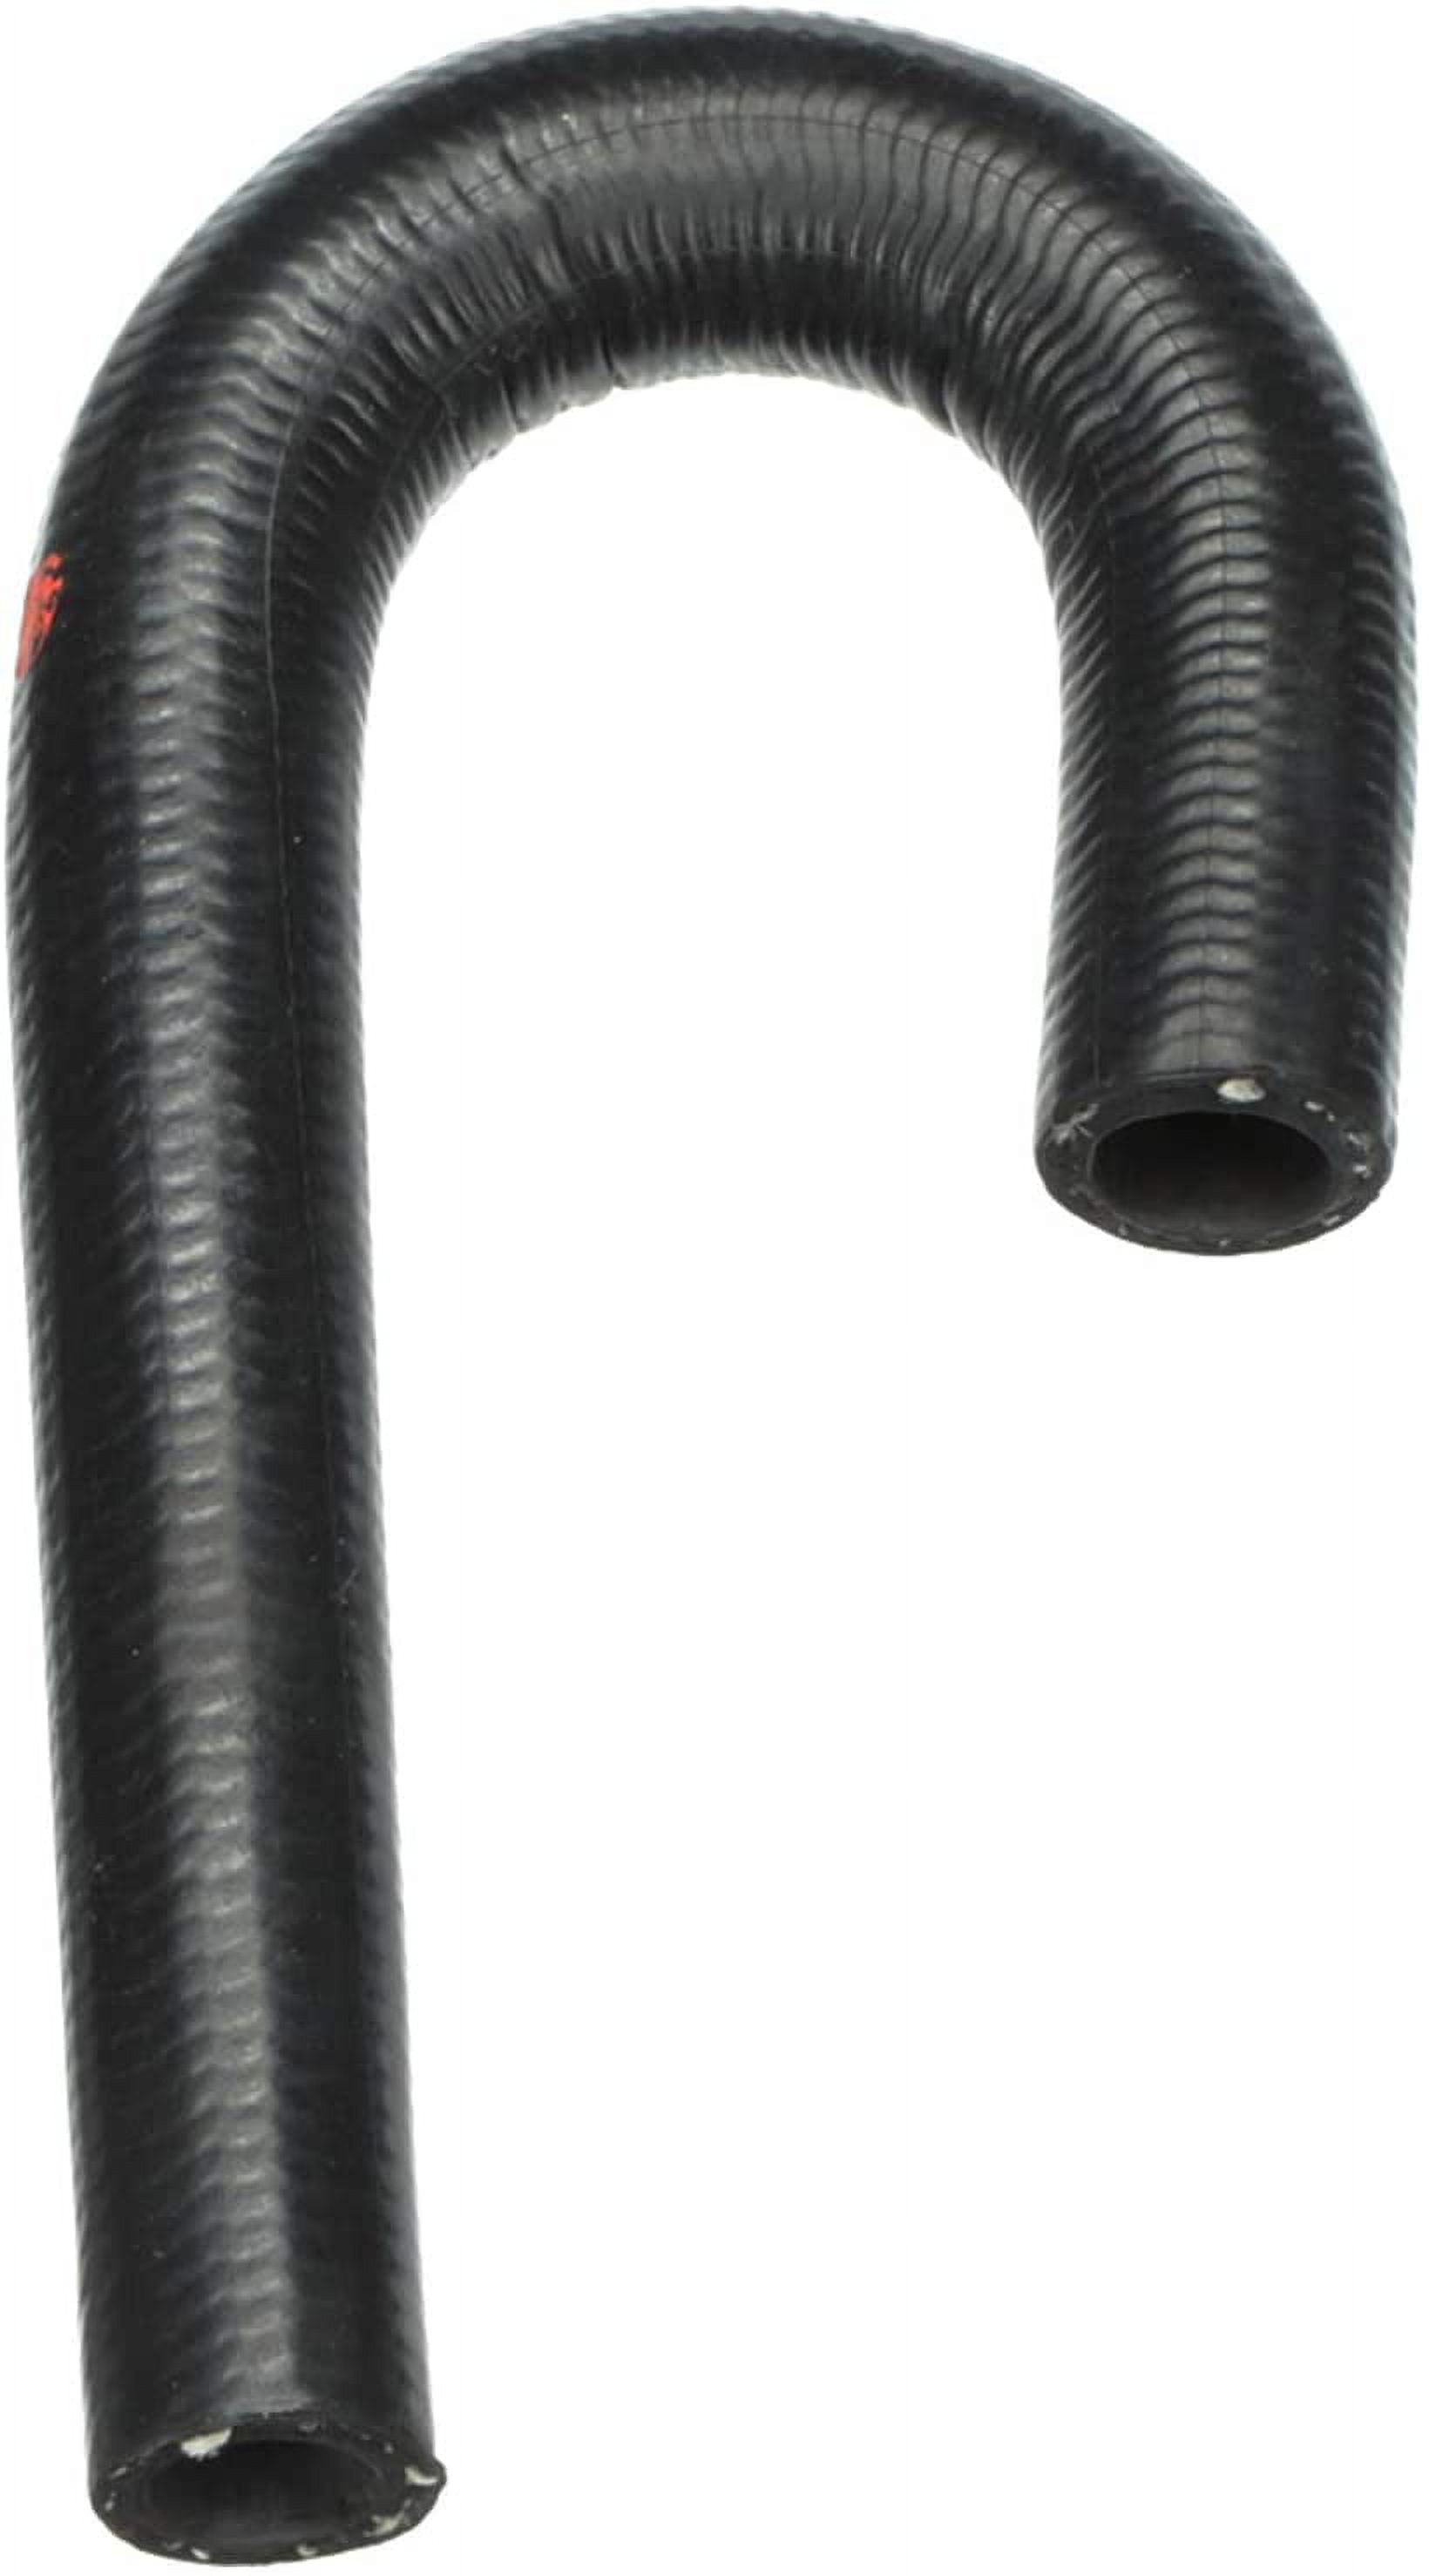 ACDelco Professional 14075S Molded Heater Hose Fits select: 2004,2006-2008  CHEVROLET SILVERADO